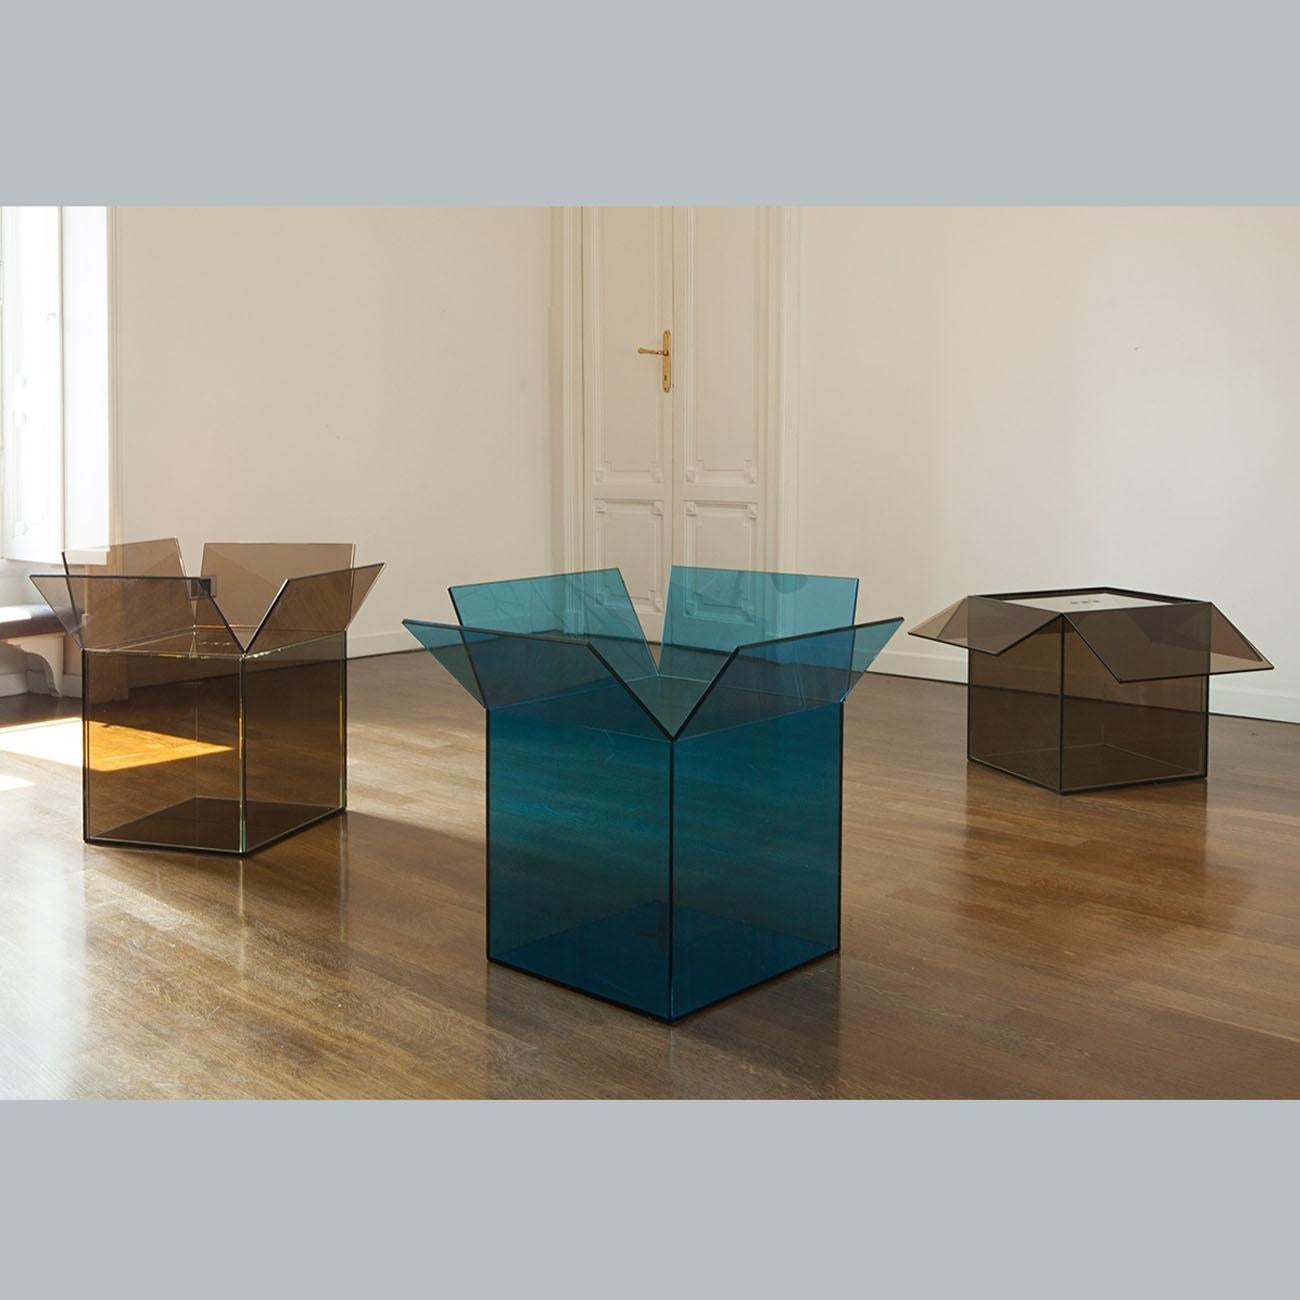 The “Out of the box” side table/box: At once a box, side-table and storage remedy,
this piece takes inspiration from the humble cardboard box, now upgraded and presented as a transparent cube . Having always been on the move and lived back and